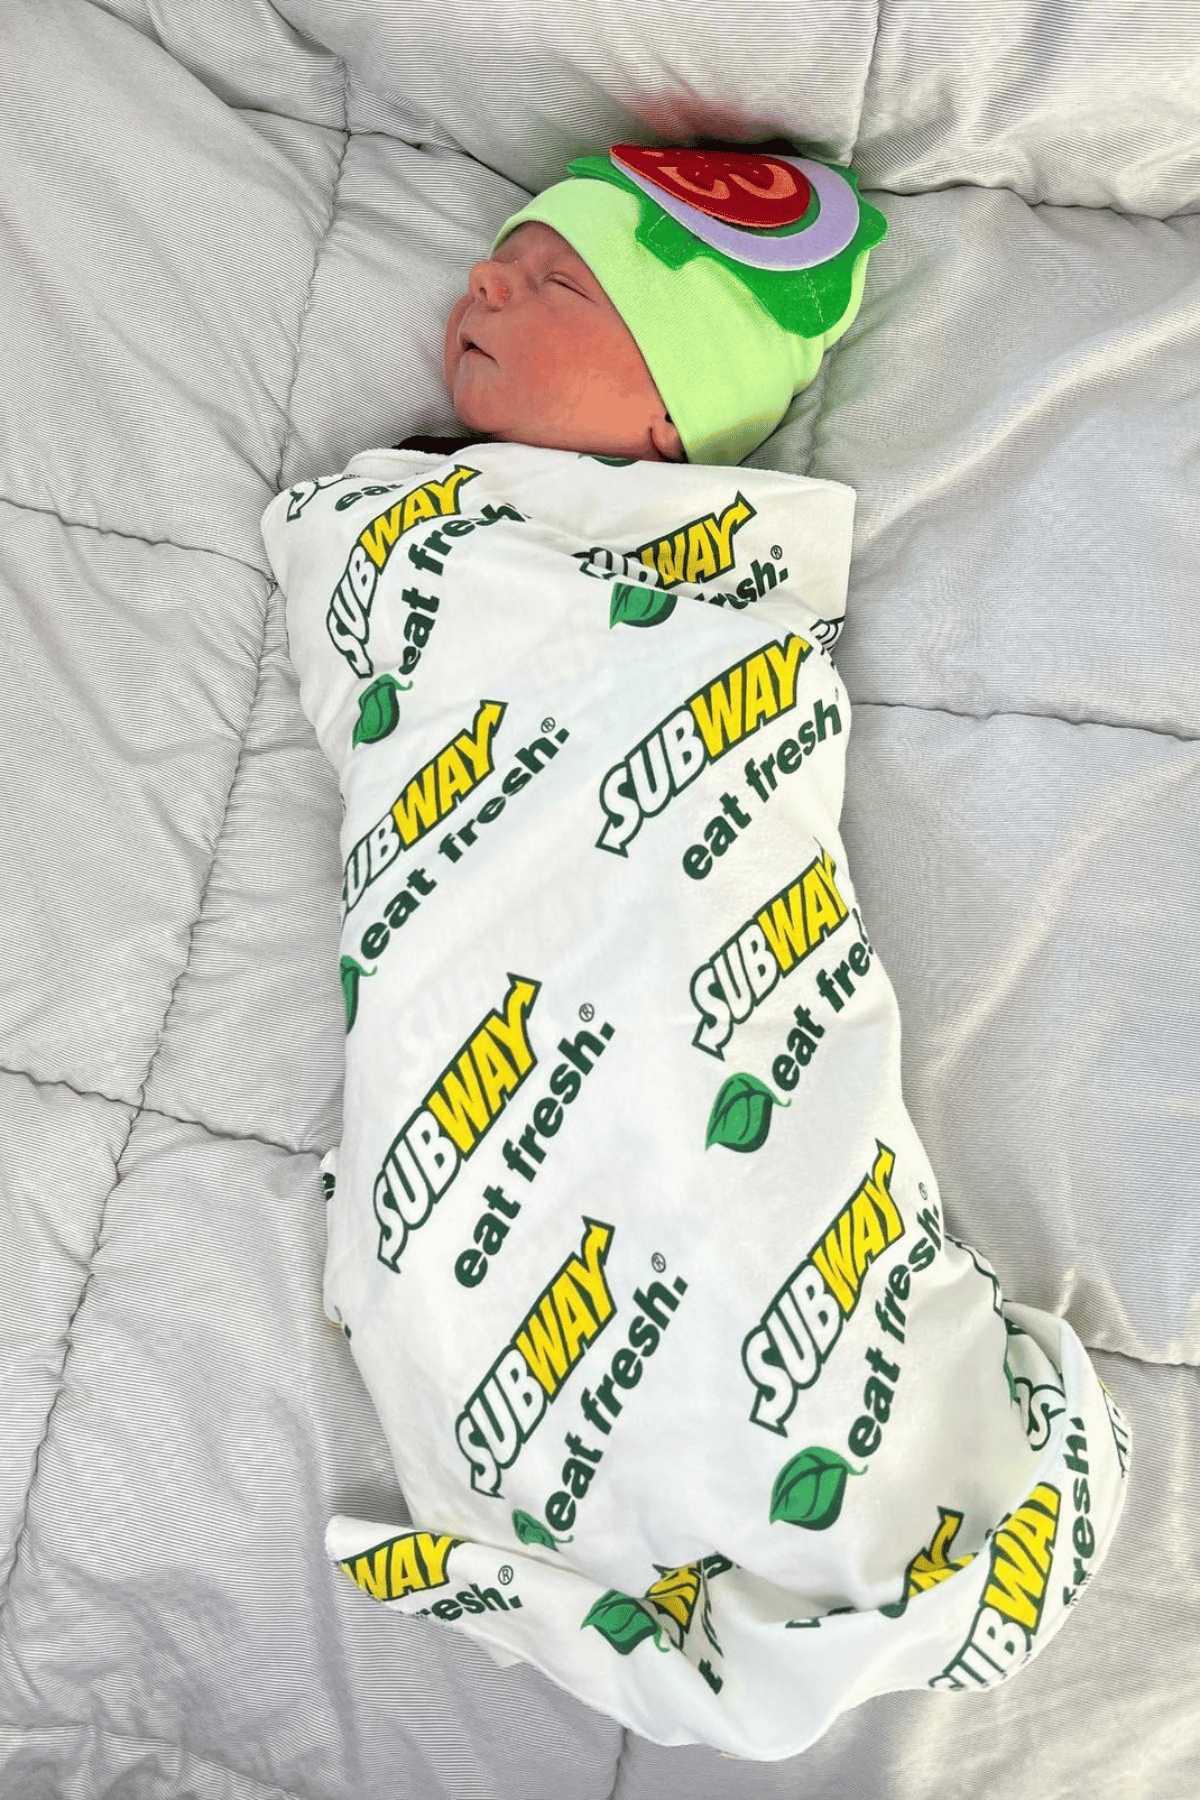 Baby wrapped in a subway sub swaddle with a hat with felt tomato and lettuce